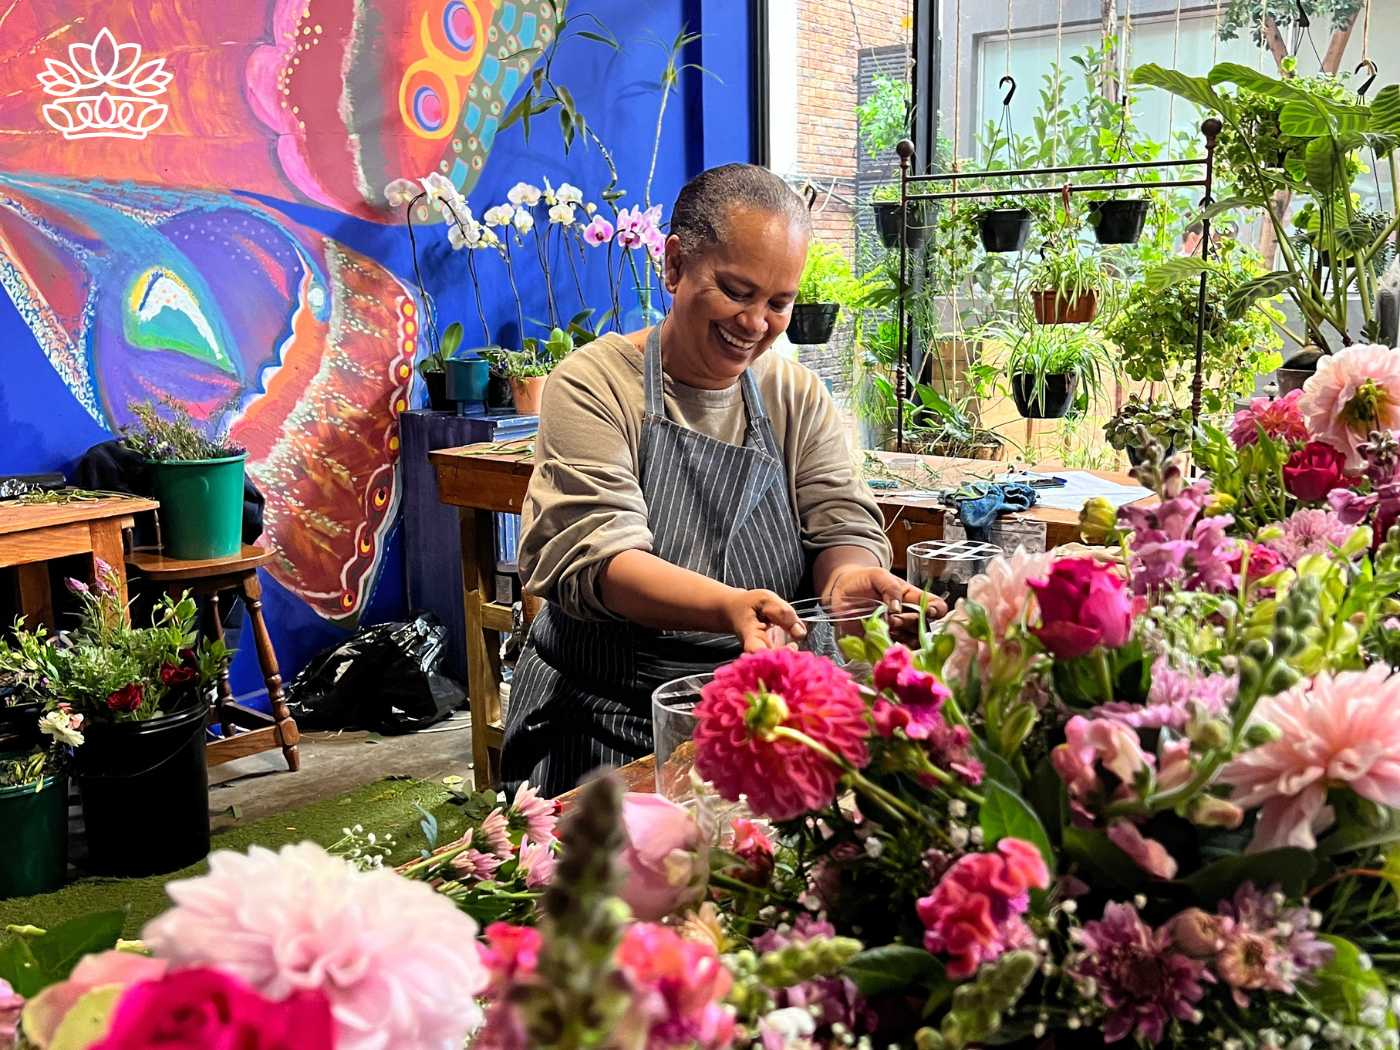 A smiling florist artistically arranging a vibrant selection of pink blooms in a charming flower shop, bringing a touch of nature's beauty to the heart of the city with Fabulous Flowers and Gifts.